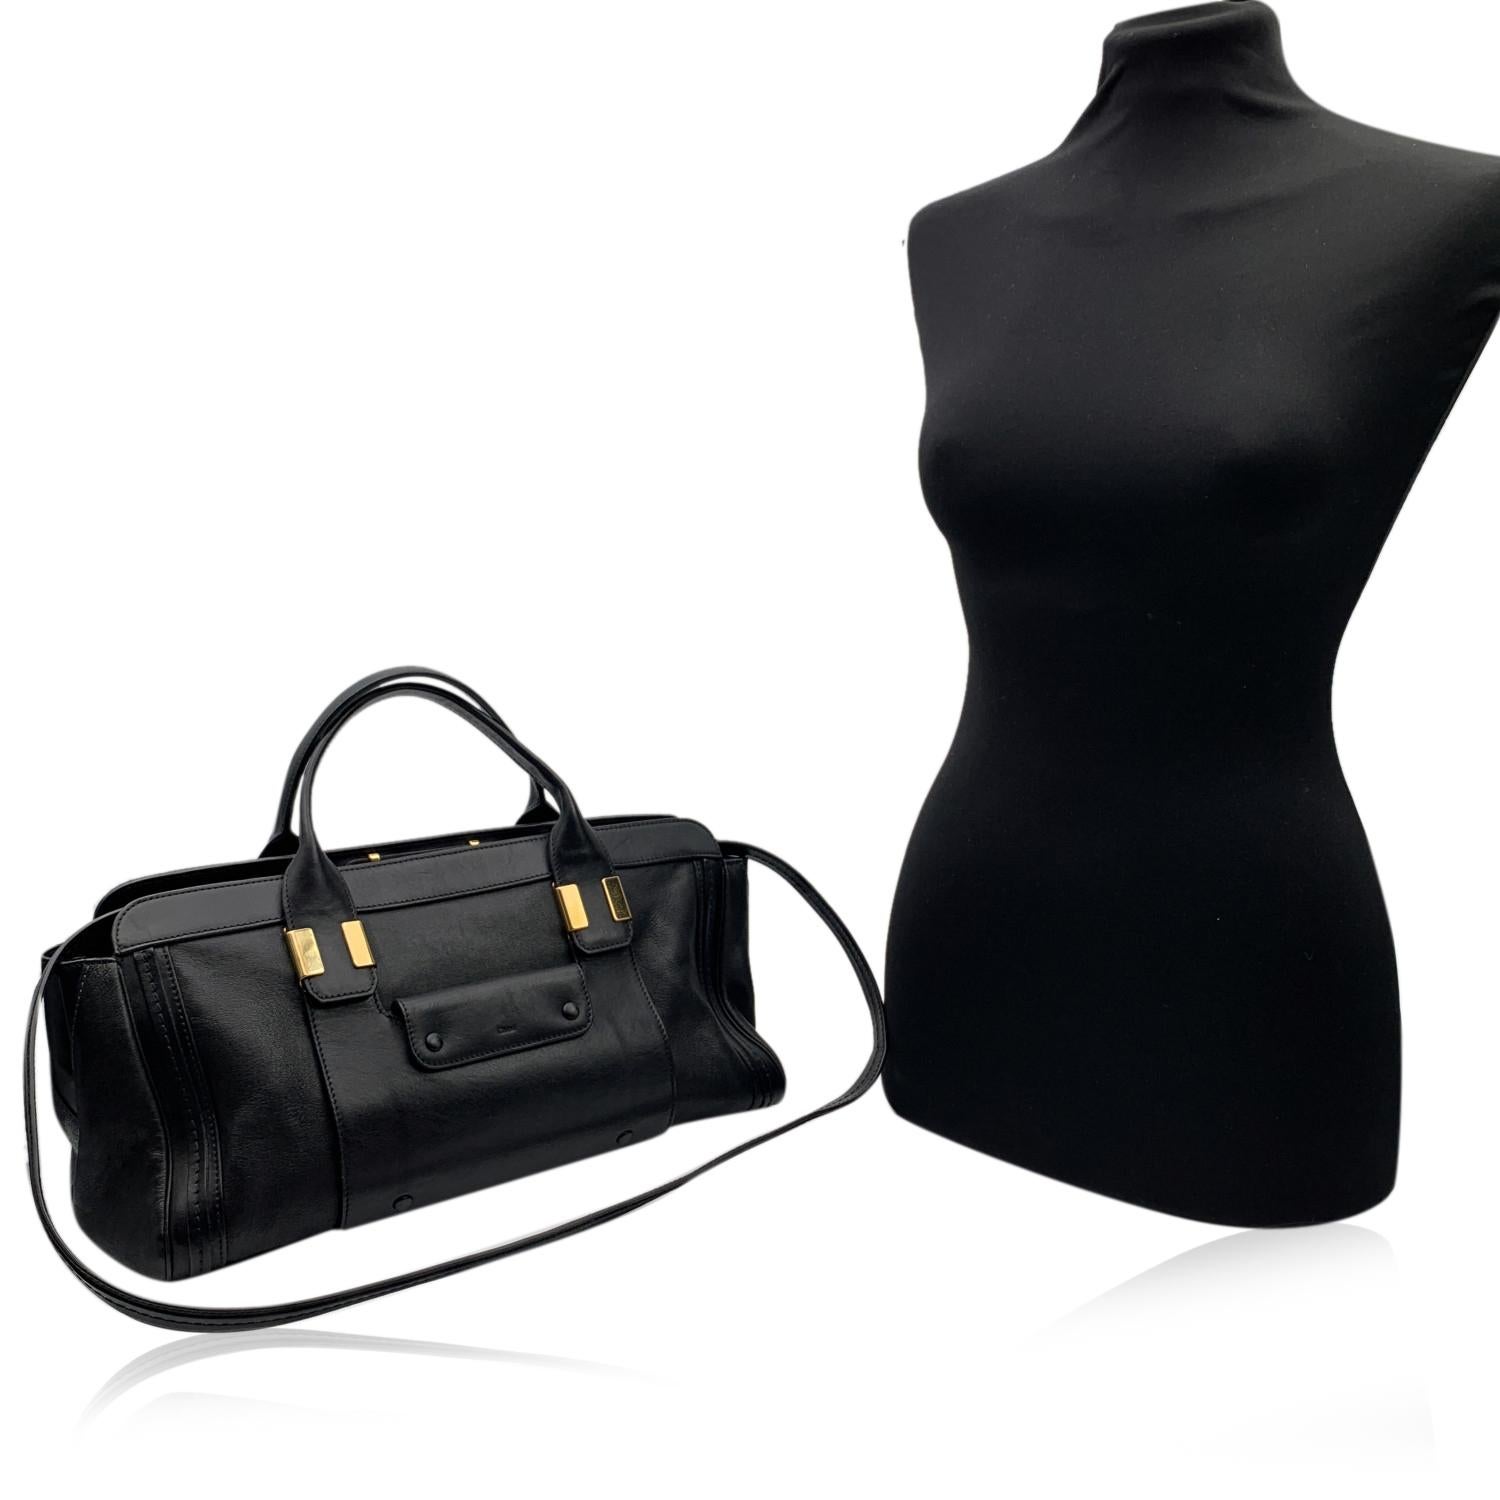 Gorgeous CHLOE 'Alice' bag crafted in genuine leather in a black color. This bag features two leather handles and removable shoulder strap. Open pocket and Flap pocket with button closure on the front. Upper zipper closure. Black fabric lining. 1